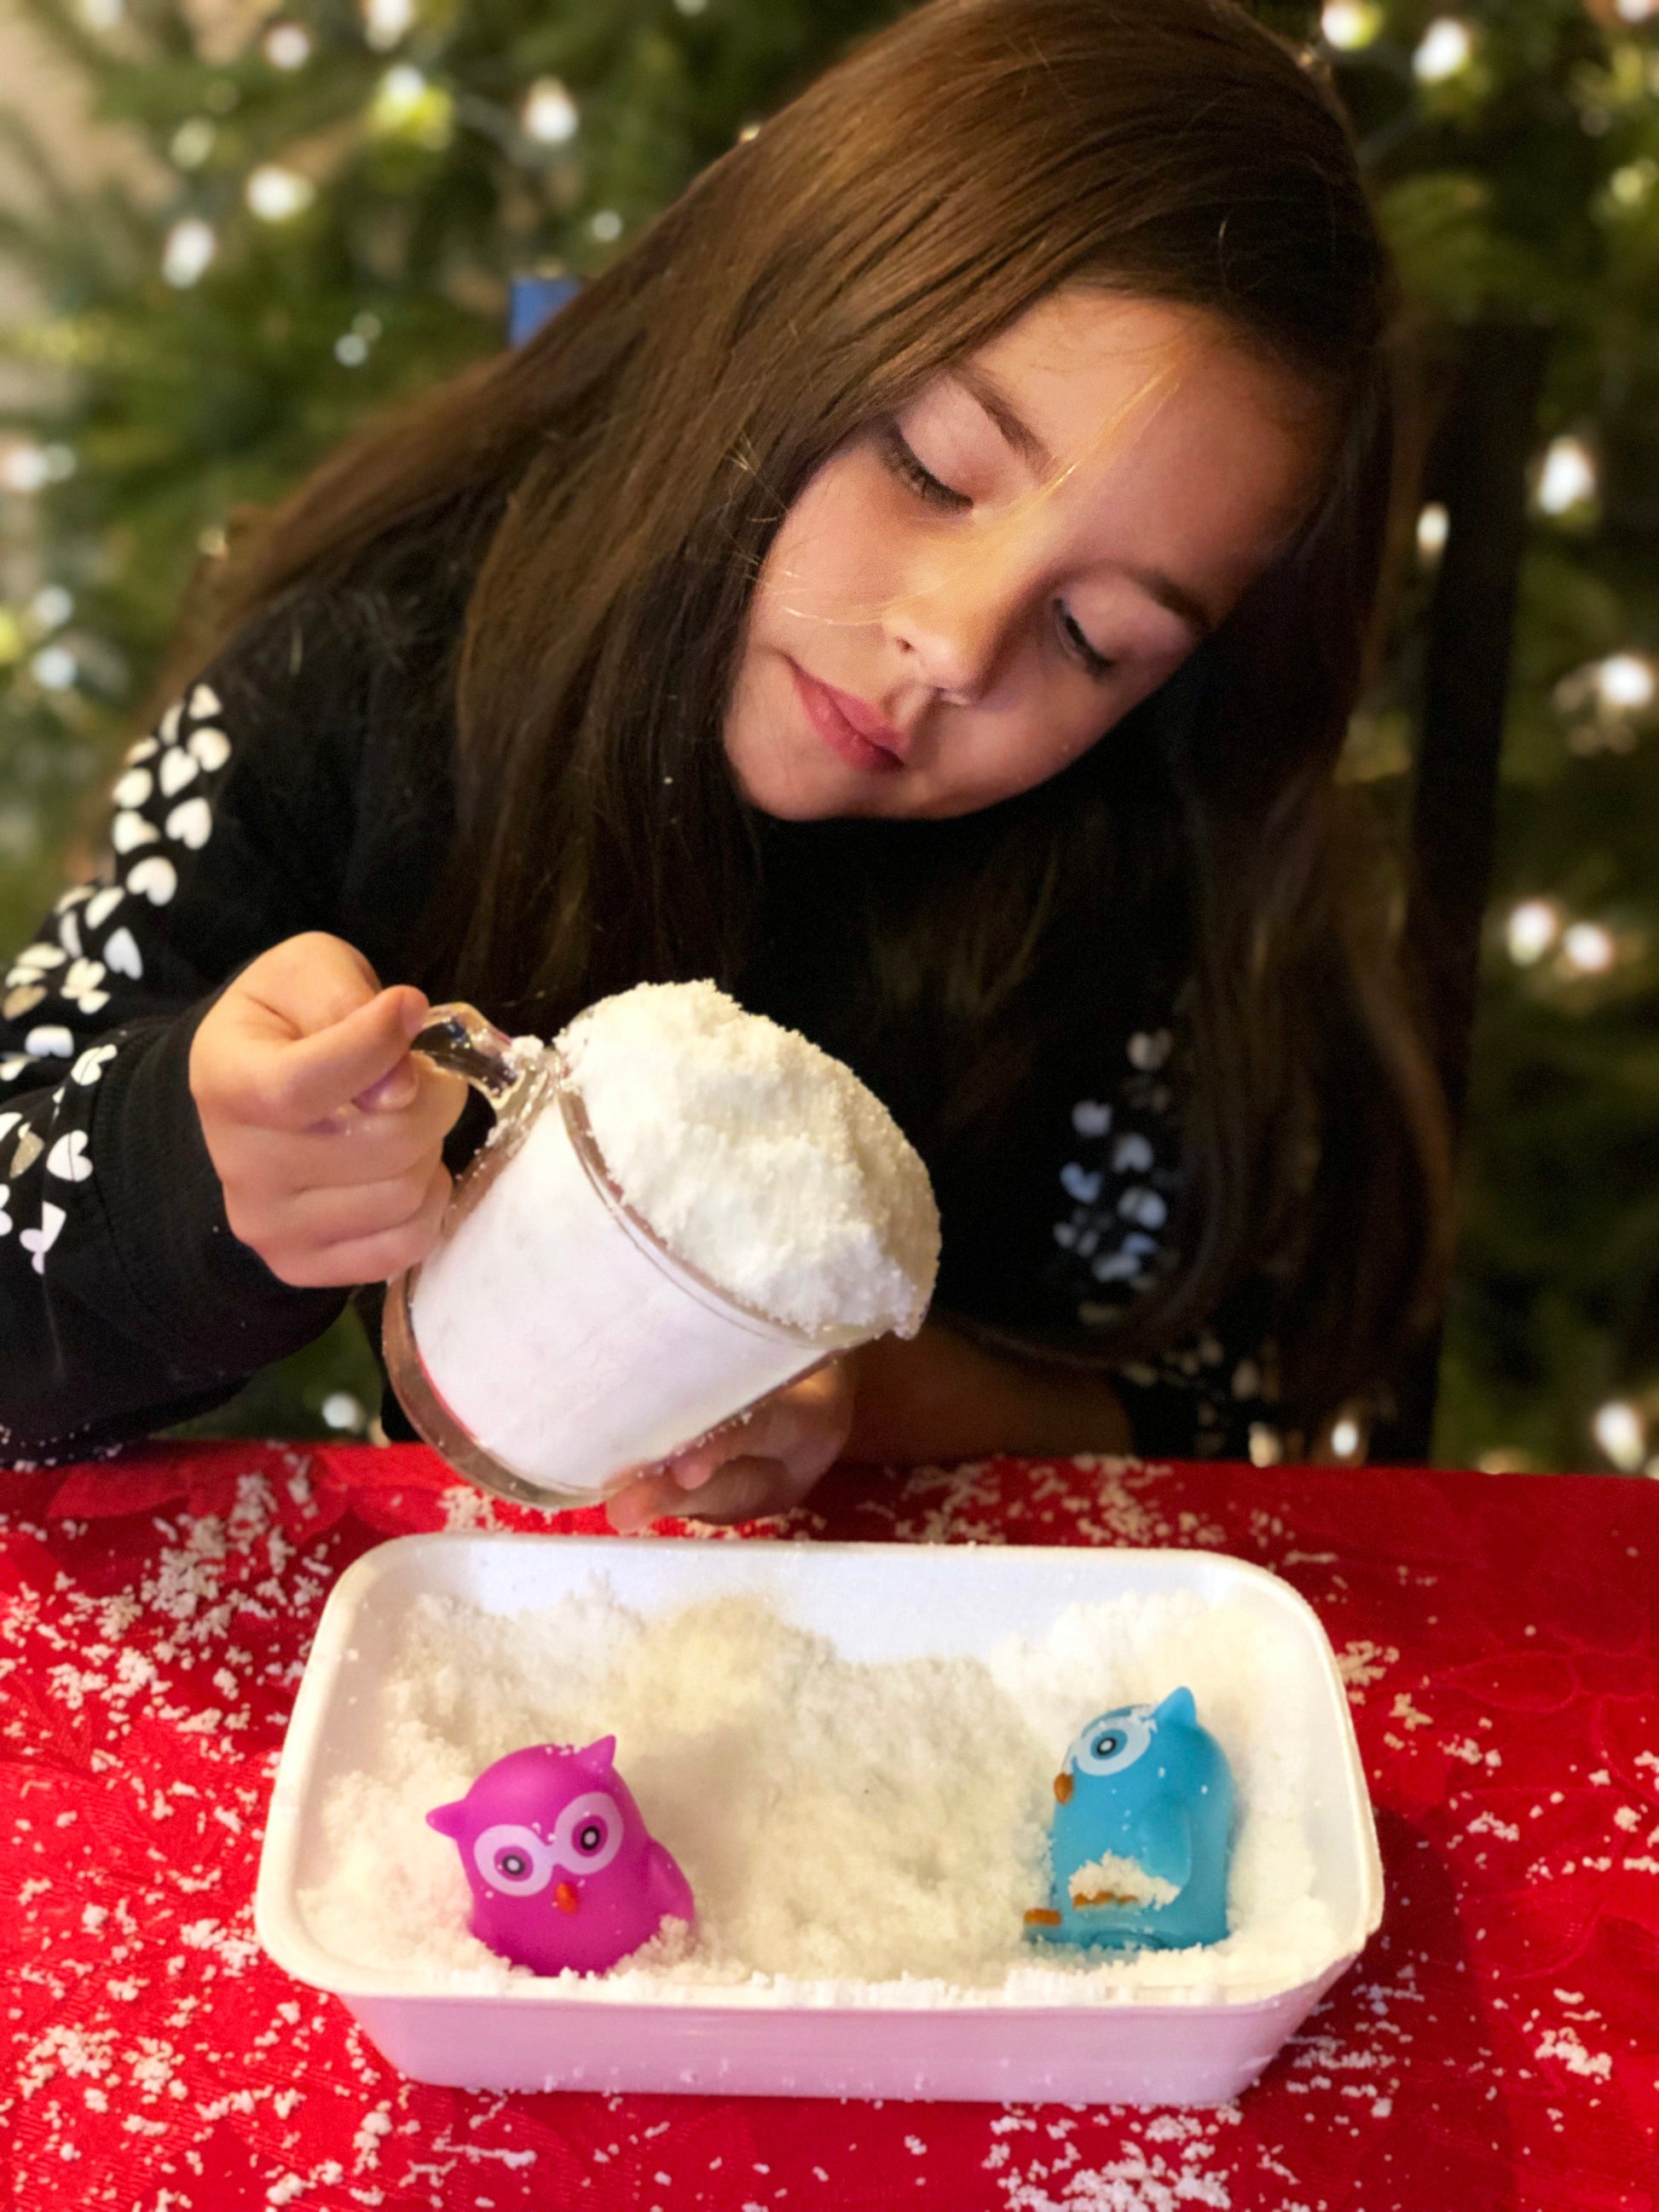 Make your own snow STEM project